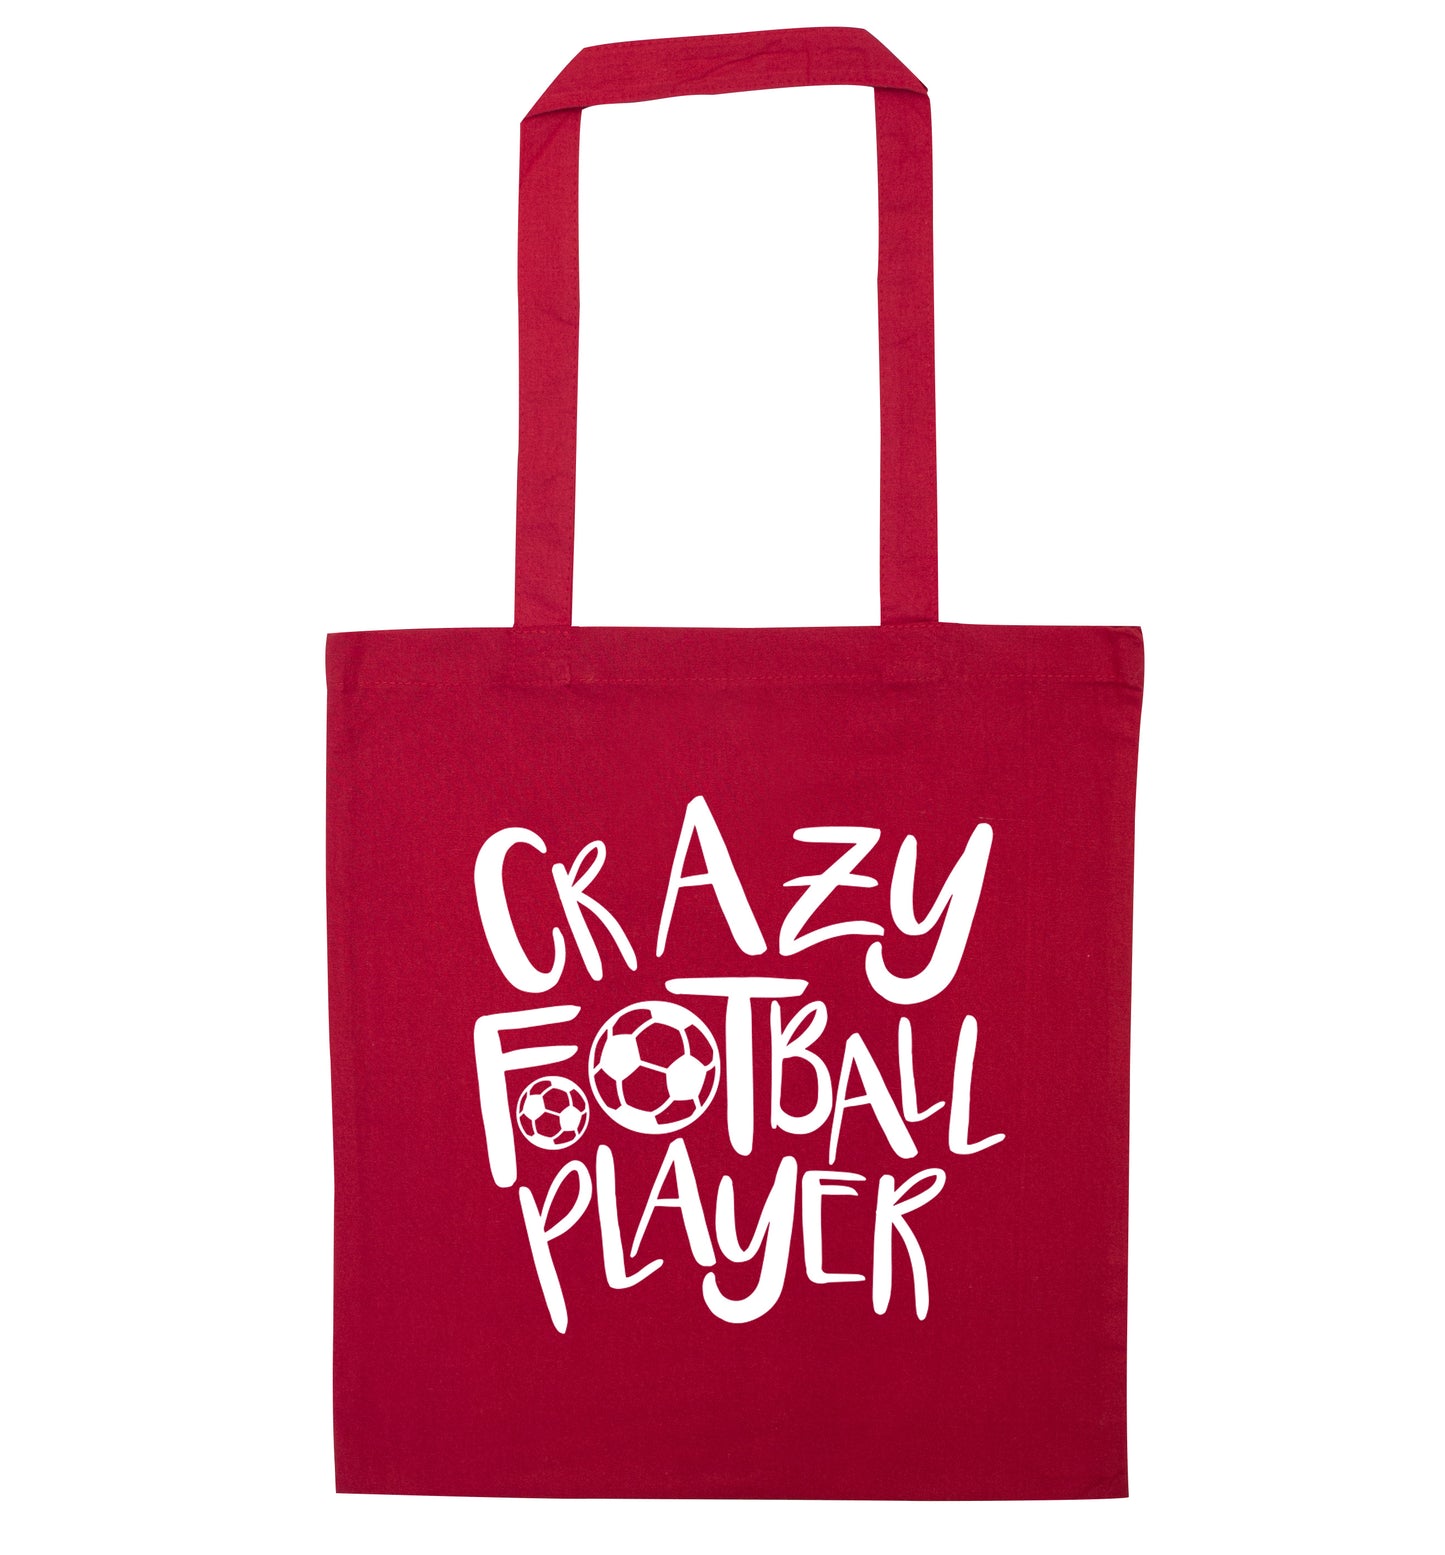 Crazy football player red tote bag